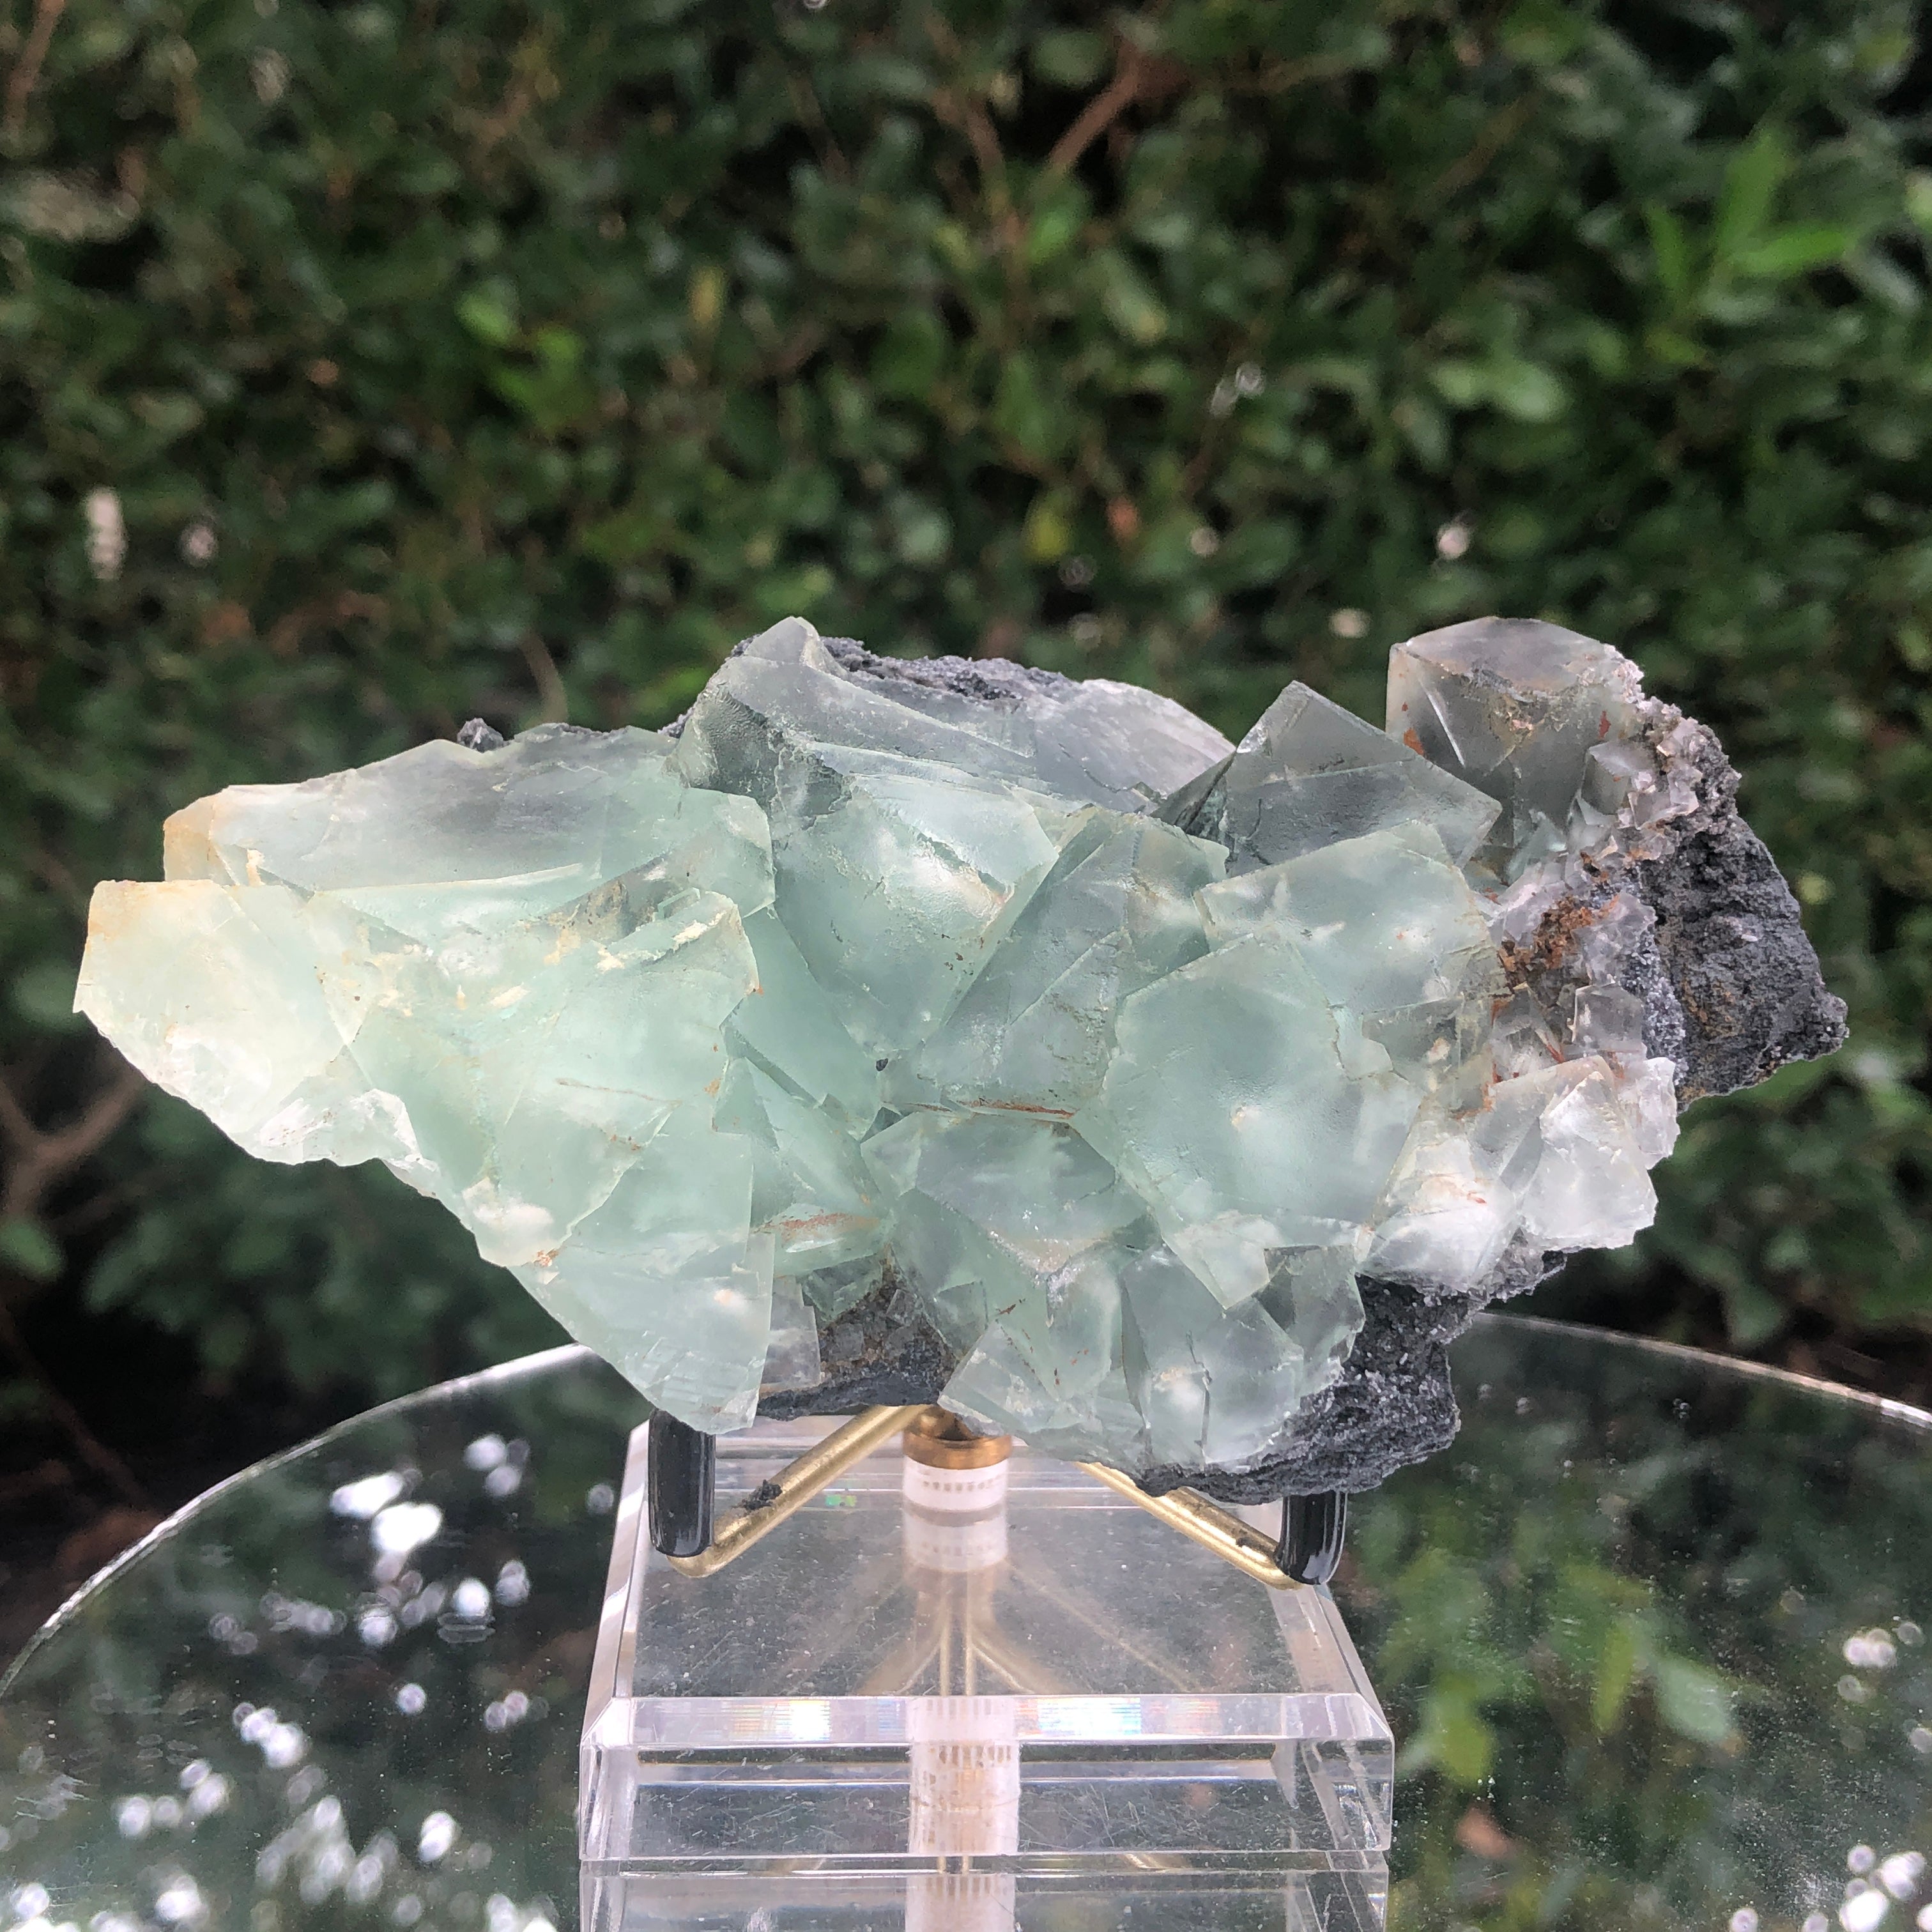 374g 13x8x5cm Green Fluorite Translucent from China